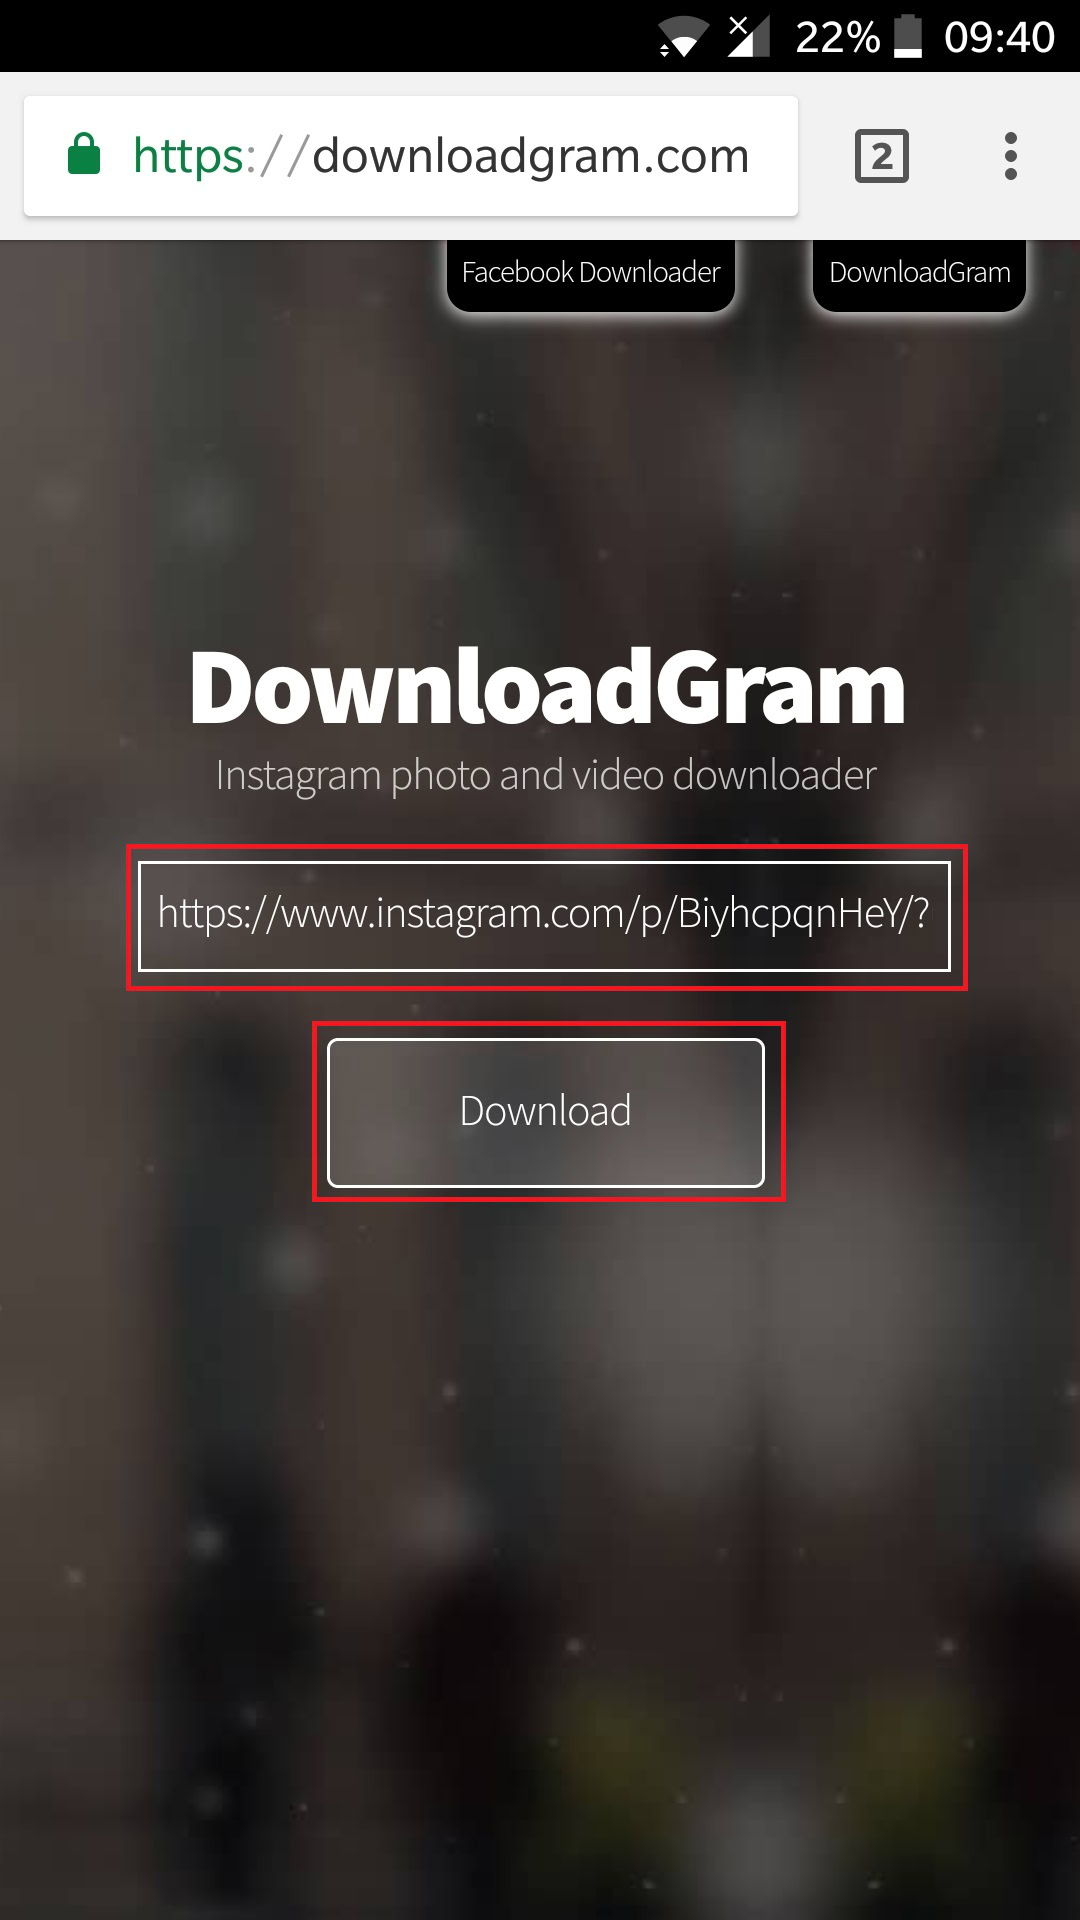 How to download images from Instagram 3